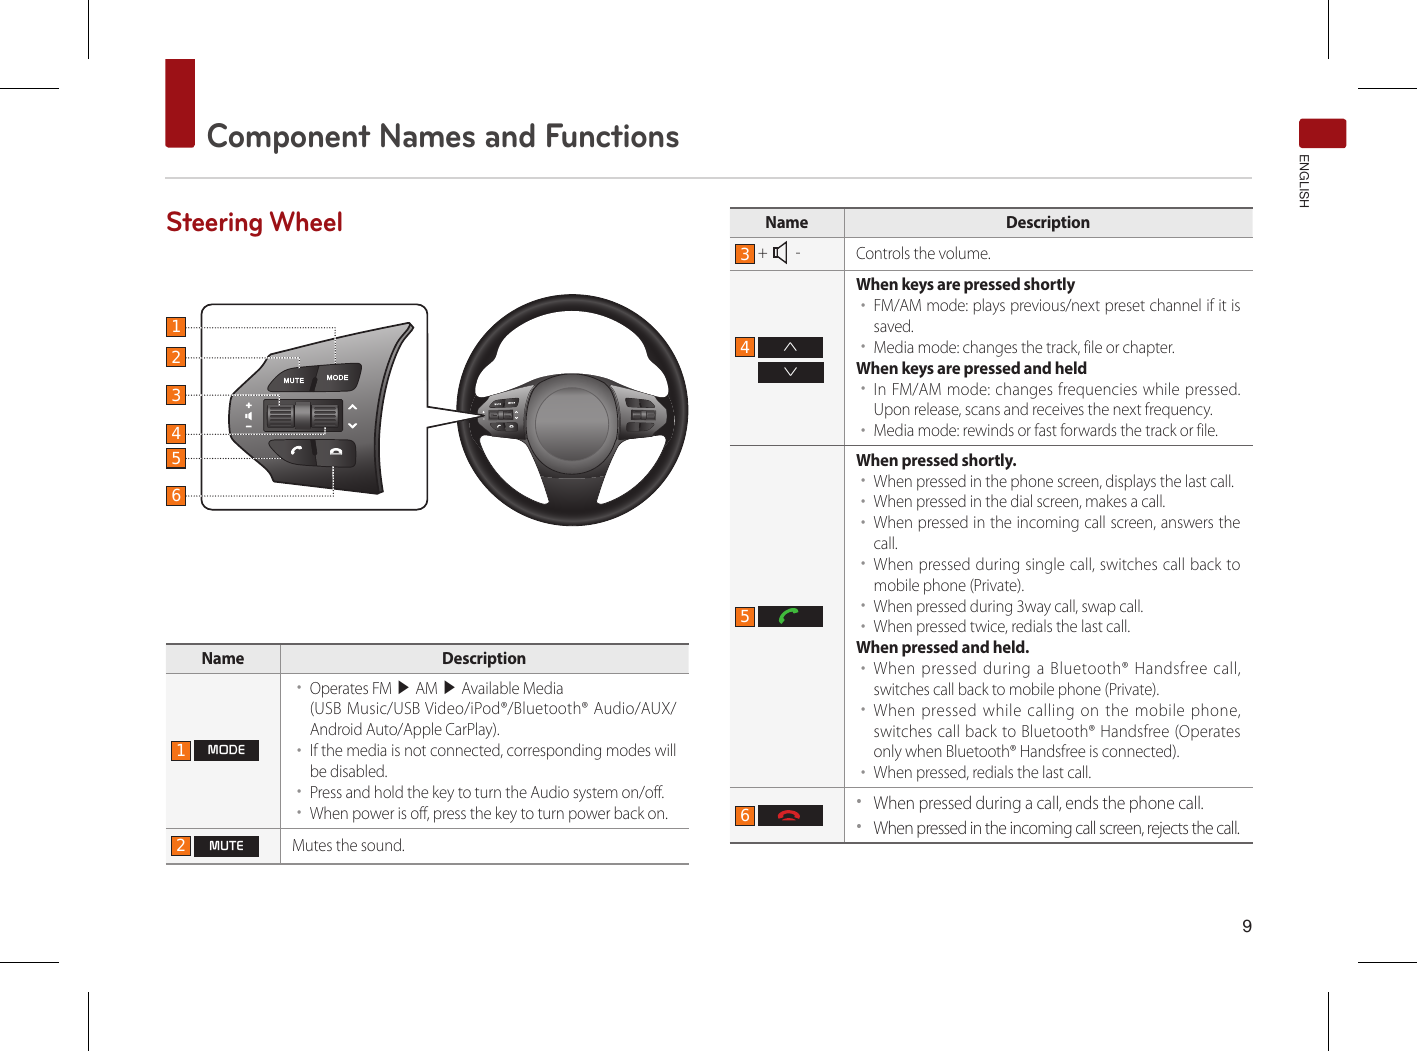  9Component Names and FunctionsENGLISHSteering WheelName Description1 MODE••Operates FM ▶ AM ▶ Available Media (USB Music/USB Video/iPod®/Bluetooth® Audio/AUX/Android Auto/Apple CarPlay).••If the media is not connected, corresponding modes will be disabled.••Press and hold the key to turn the Audio system on/off.••When power is off, press the key to turn power back on.2 MUTEMutes the sound.  Name Description3 +  - Controls the volume.  4  ∧∨When keys are pressed shortly ••FM/AM mode: plays previous/next preset channel if it is saved.••Media mode: changes the track, file or chapter.When keys are pressed and held ••In FM/AM mode: changes frequencies while pressed. Upon release, scans and receives the next frequency.••Media mode: rewinds or fast forwards the track or file.5 When pressed shortly.••When pressed in the phone screen, displays the last call. ••When pressed in the dial screen, makes a call.••When pressed in the incoming call screen, answers the call.••When pressed during single call, switches call back to mobile phone (Private).••When pressed during 3way call, swap call. ••When pressed twice, redials the last call.When pressed and held.••When pressed during a Bluetooth® Handsfree call, switches call back to mobile phone (Private).••When pressed while calling on the mobile phone, switches call back to Bluetooth® Handsfree (Operates only when Bluetooth® Handsfree is connected).••When pressed, redials the last call. 6 ••When pressed during a call, ends the phone call. ••When pressed in the incoming call screen, rejects the call. 123456